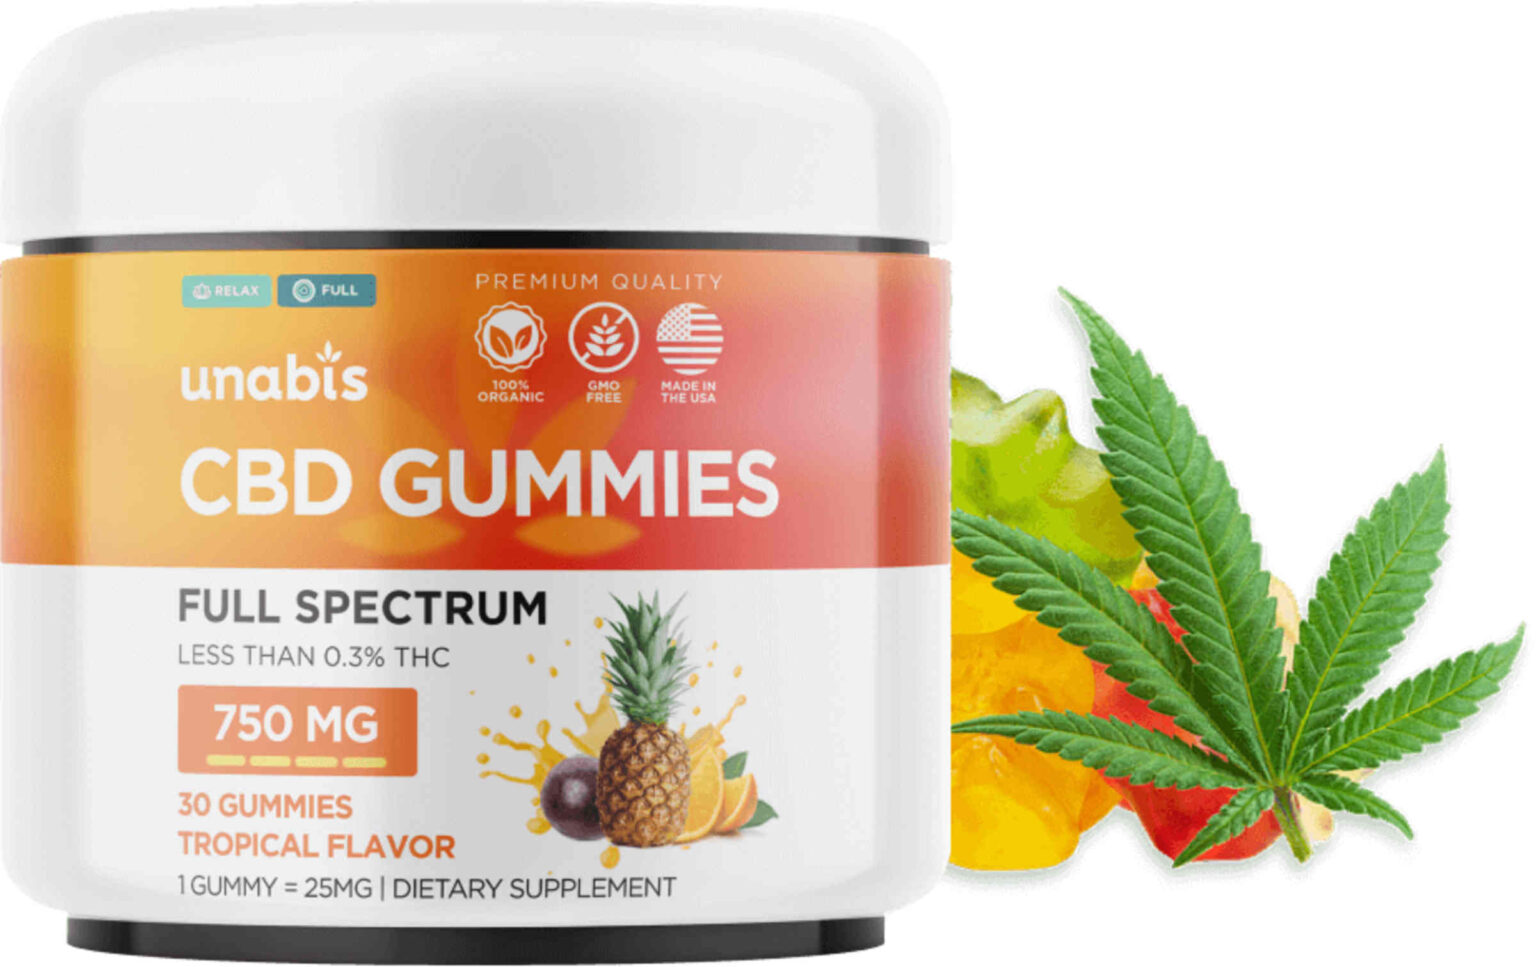 Unabis CBD gummies come in many different tasty flavors. Try them all after you consult with your doctor to see if they're right for you!